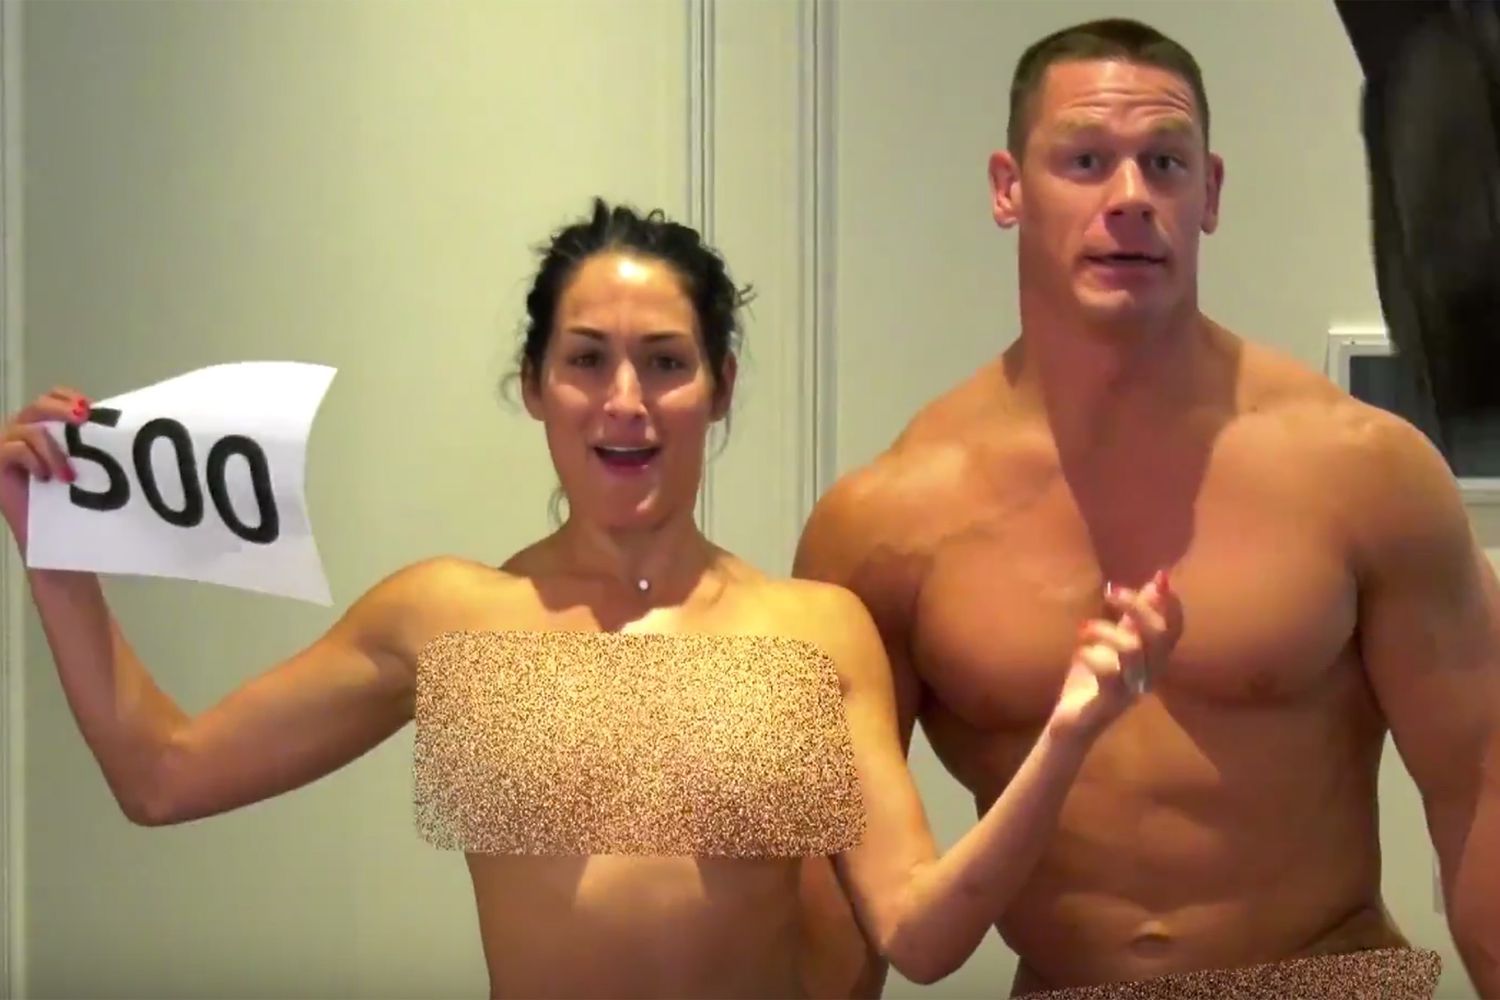 craig anthony irvine recommends has nikki bella been nude pic